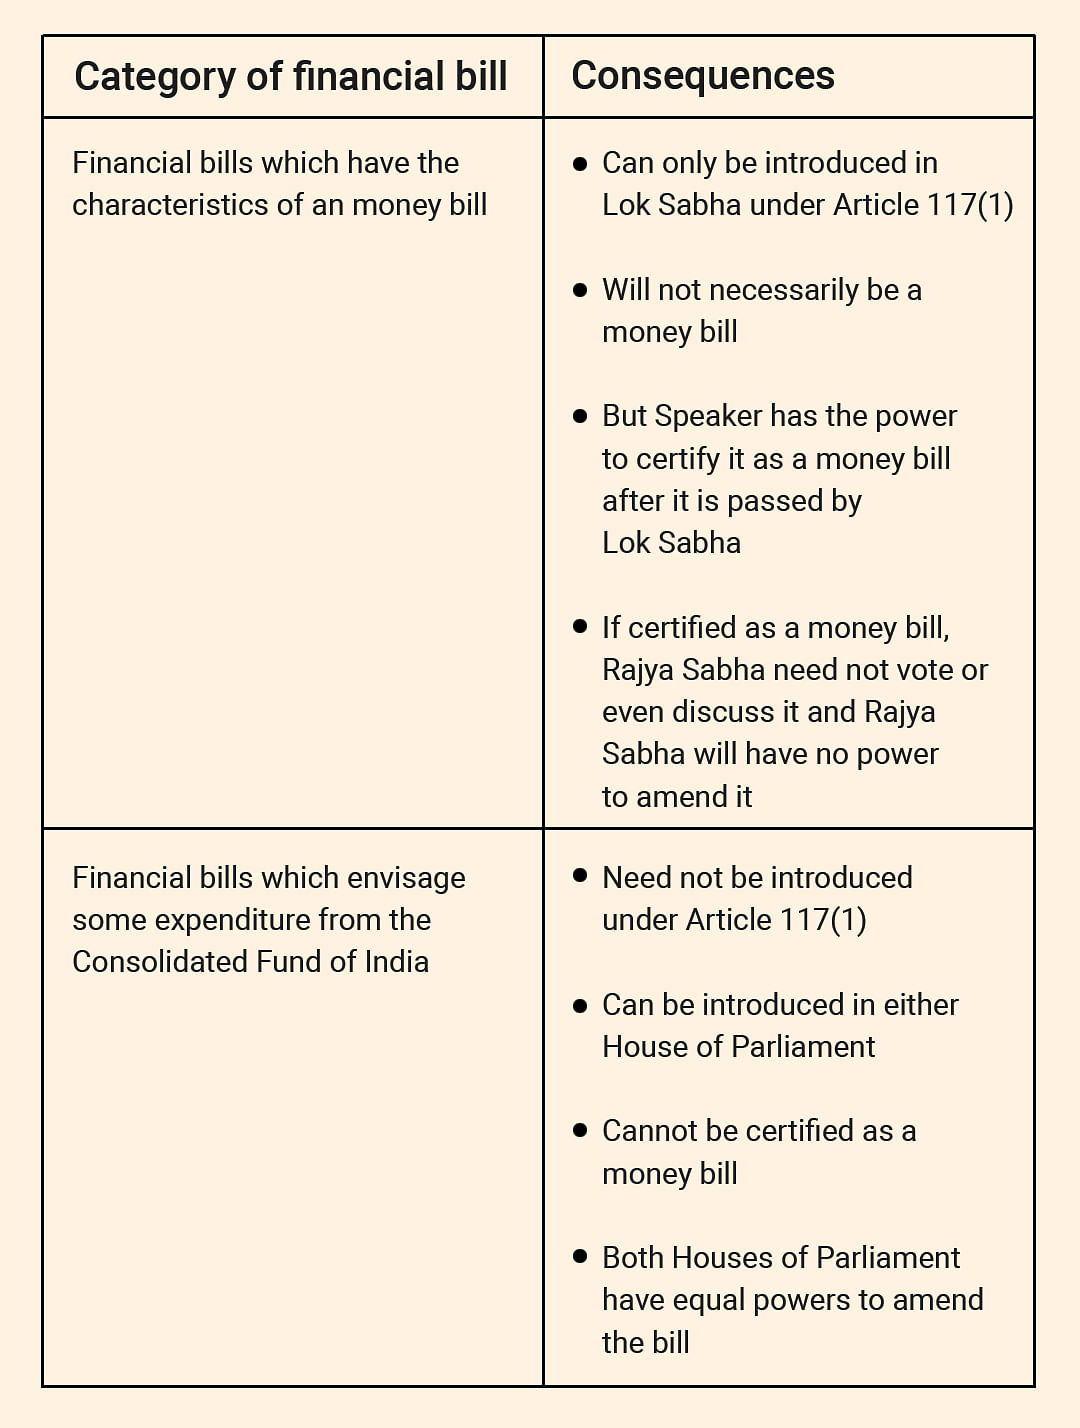 There was no need to introduce it under Article 117(1) as it does not have the characteristics of a money bill.